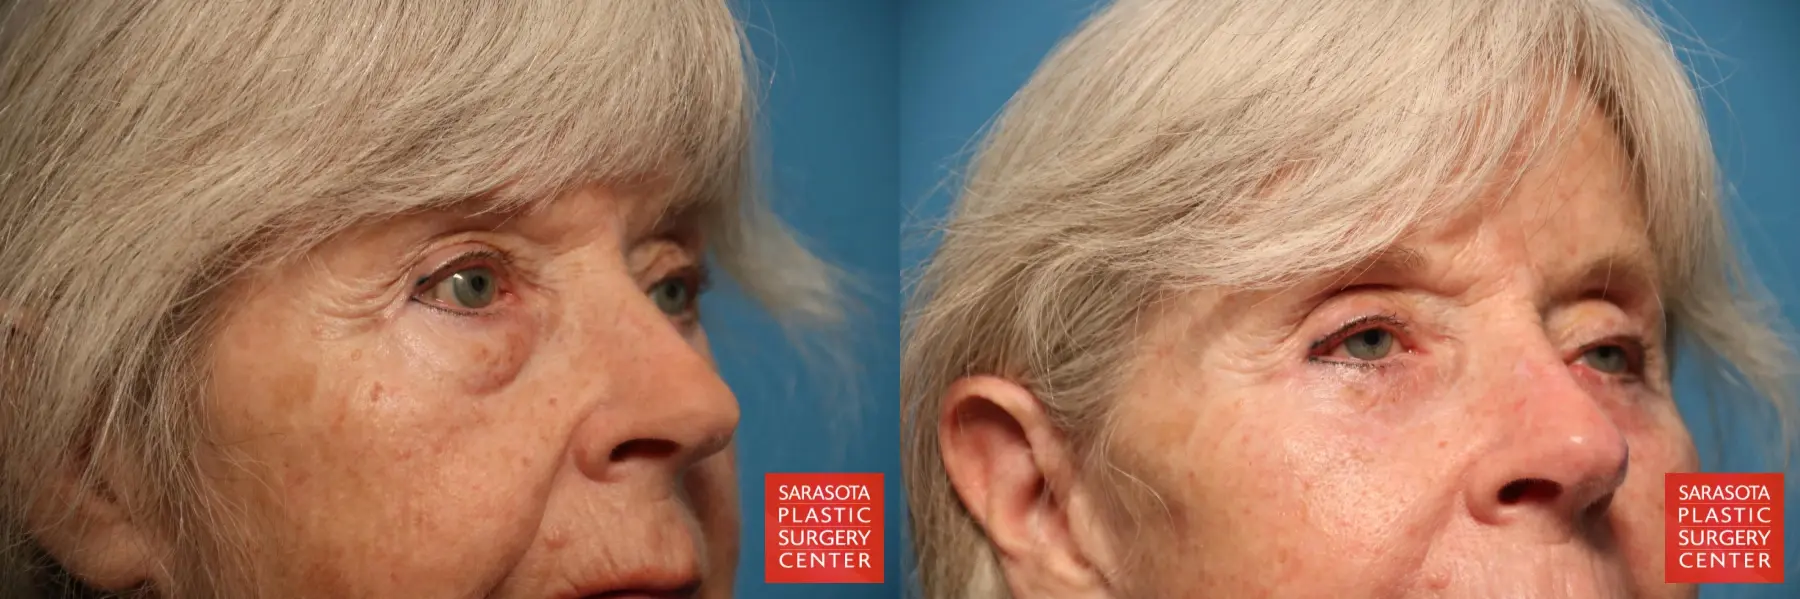 Eyelid Lift: Patient 15 - Before and After 3